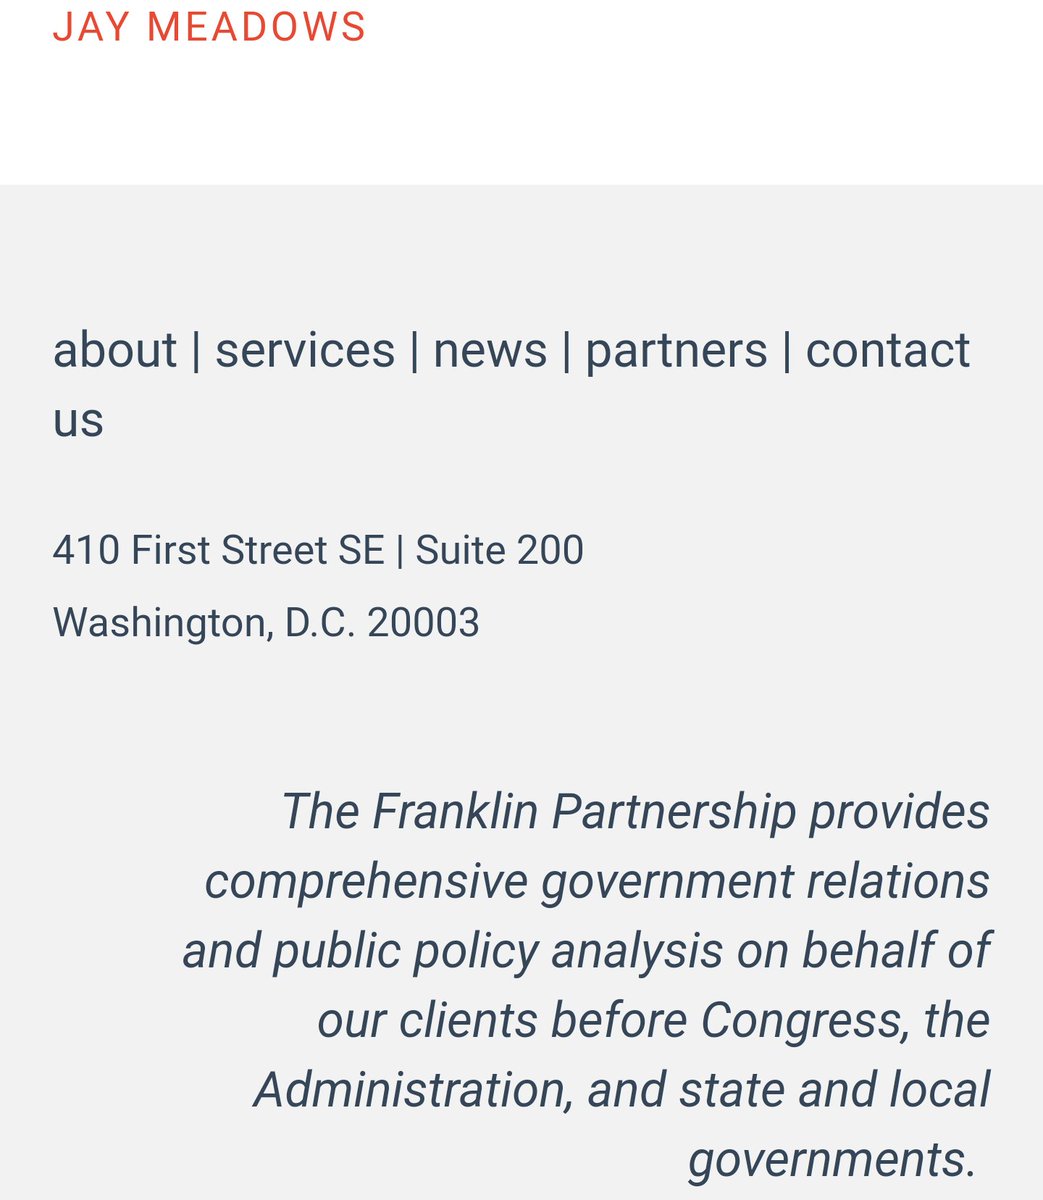 I believe Jay Meadows is likely this lobbyist who has roots in Texas, but works for The Franklin Partnership in D.C.This would also correspond with USATransForm having a D.C. branch as well and suggests USATF may be looking to unofficially "lobby" political leaders. /16